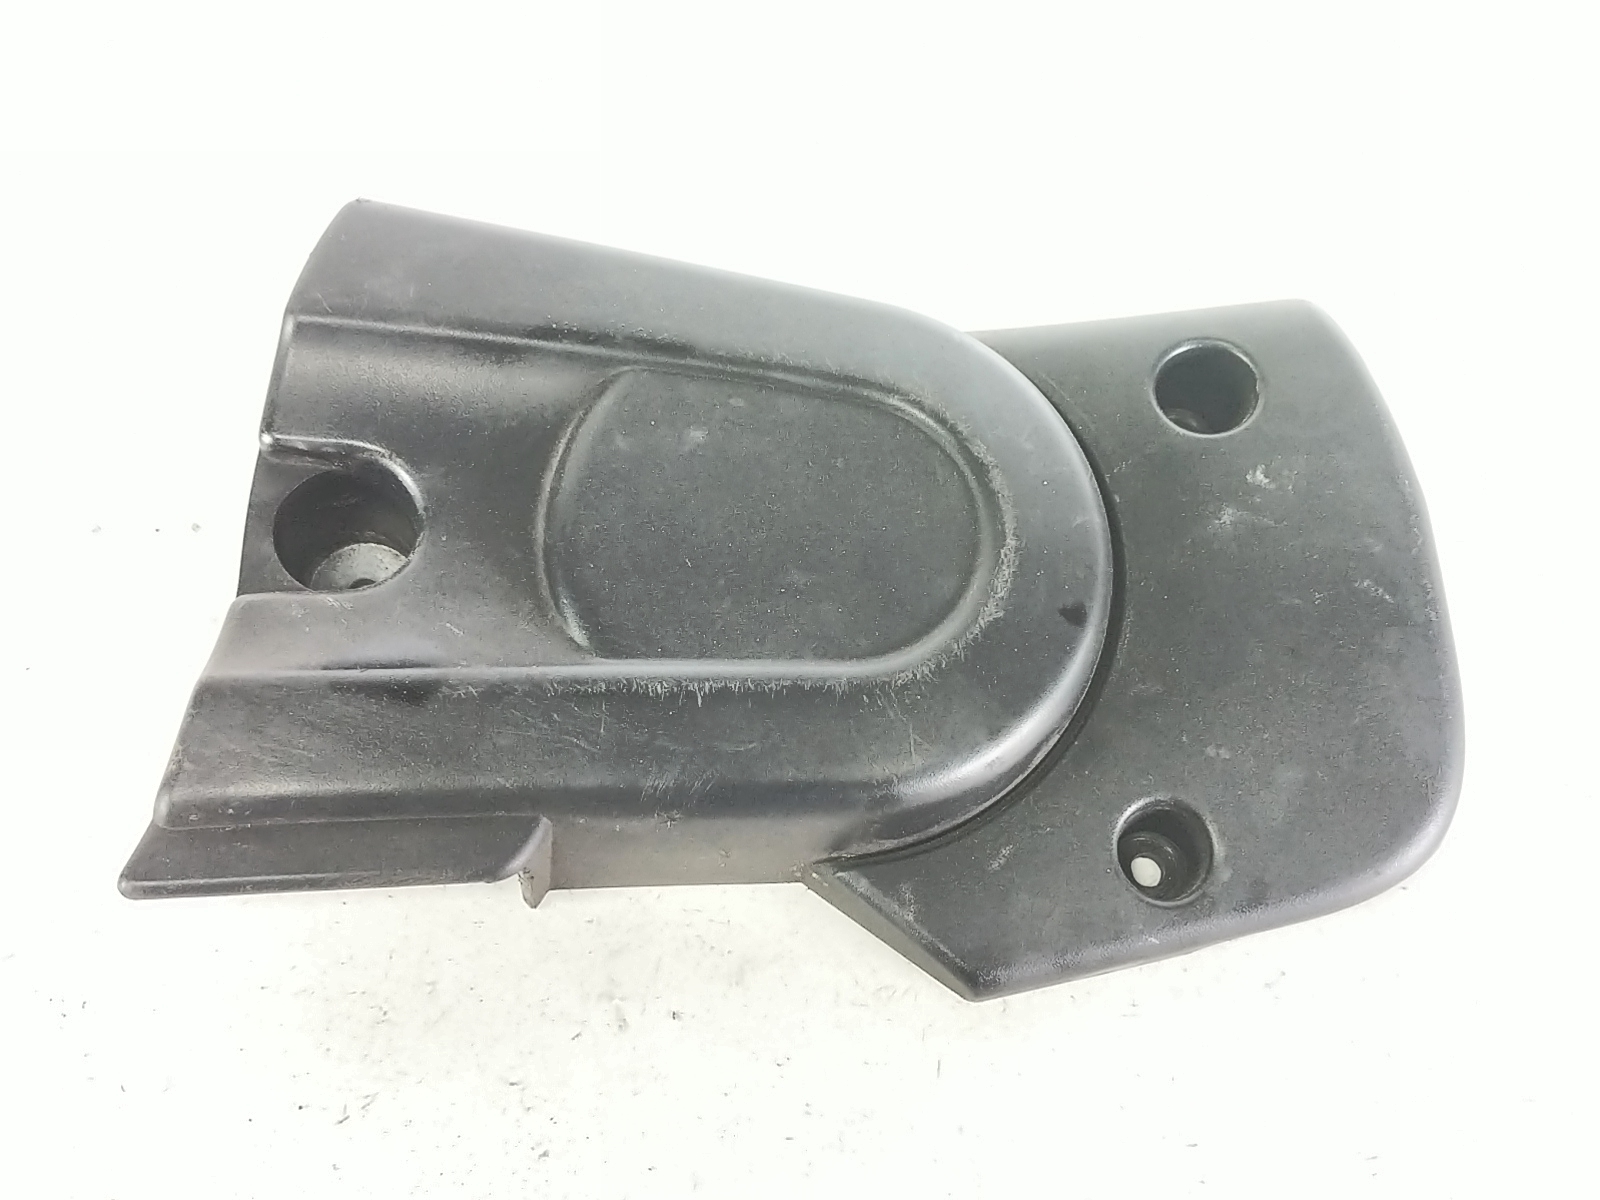 2003 Buell Lightning XB9S Sprocket Pully Cover G0555.02A8